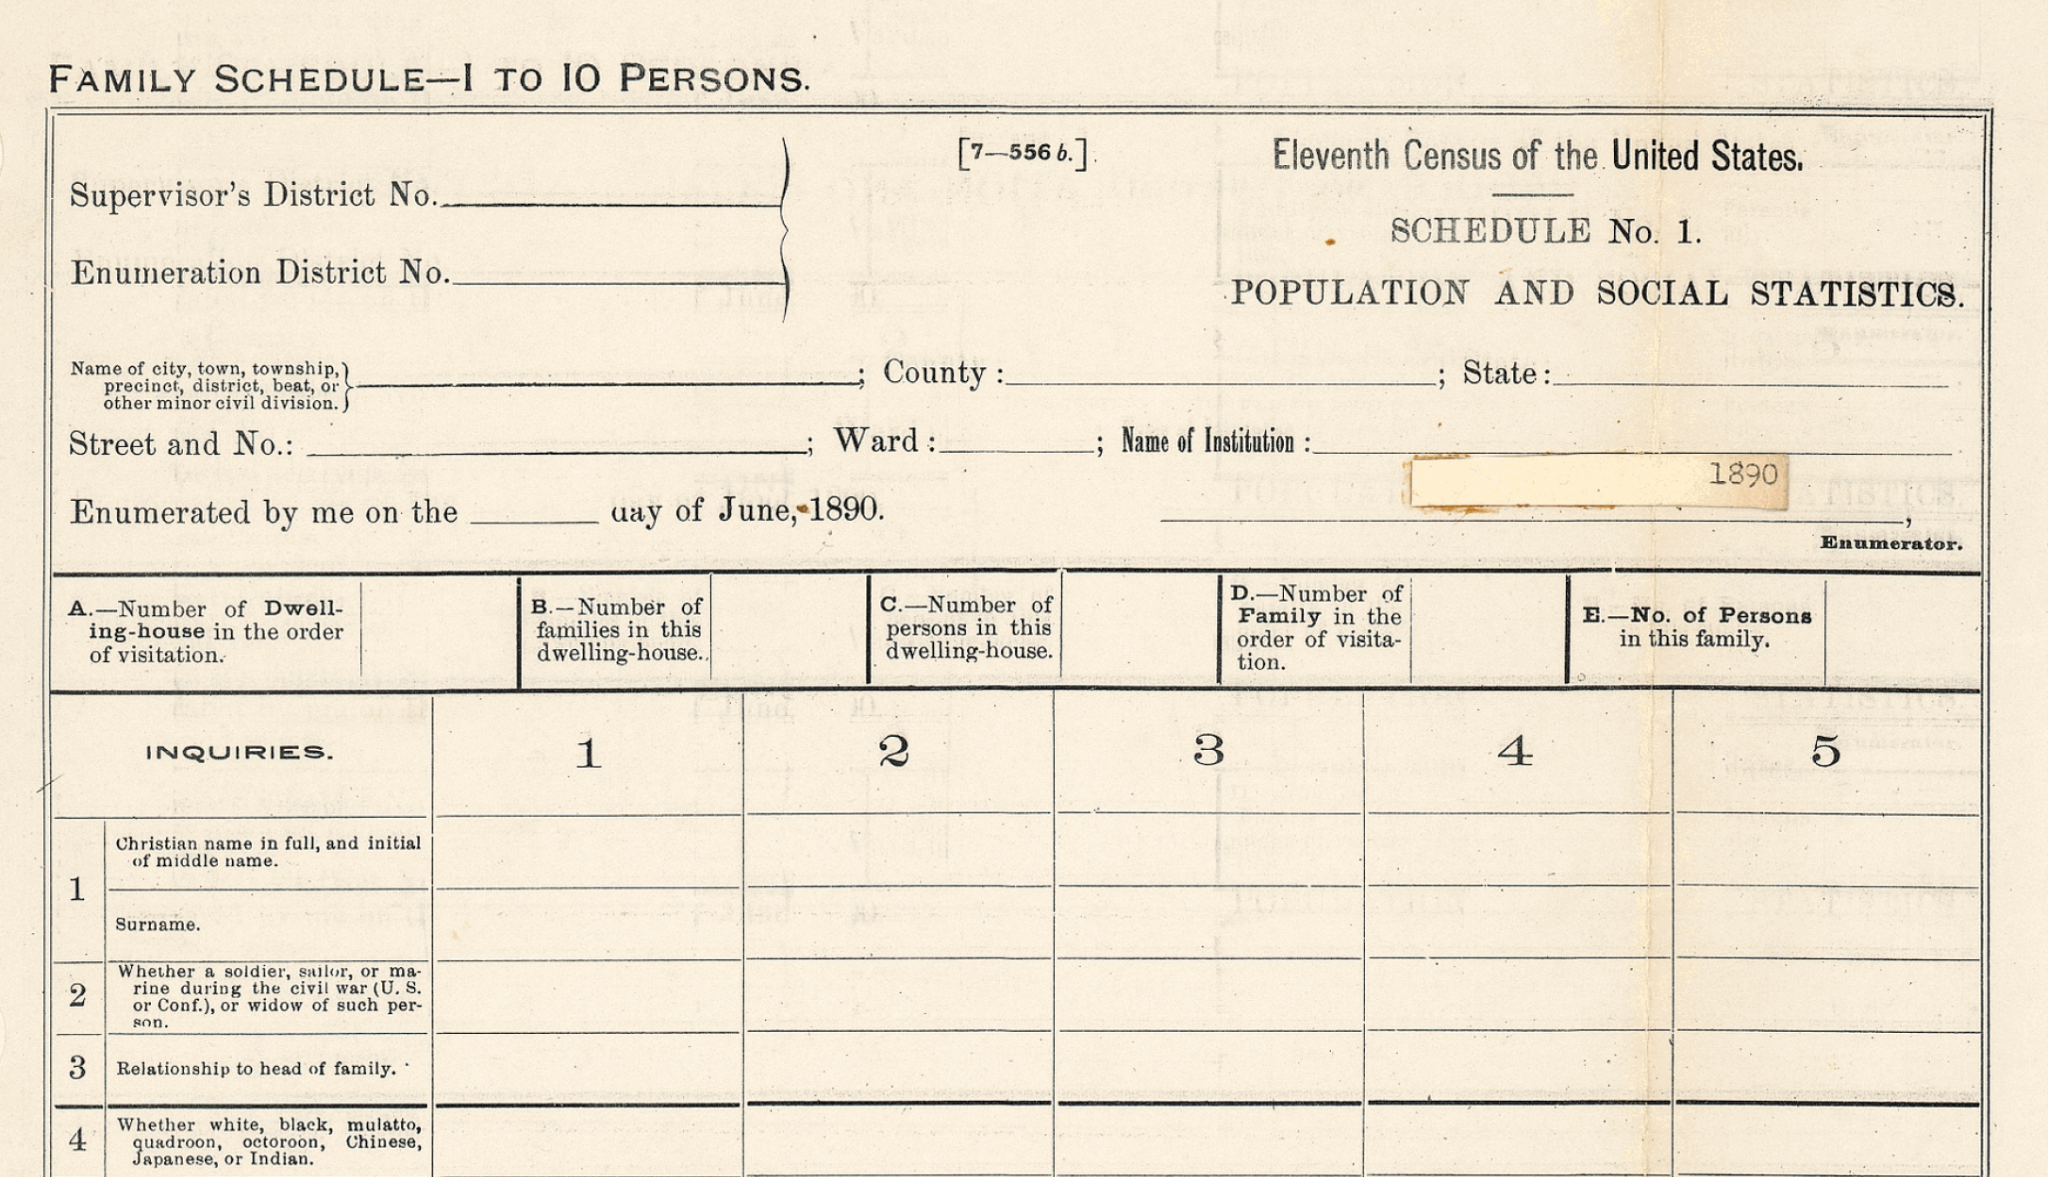 Excerpt from 1890 Census form with a question that asks whether each person in the household is “white, black, mulatto, quadroon, octoroon, Chinese, Japanese, or Indian.”